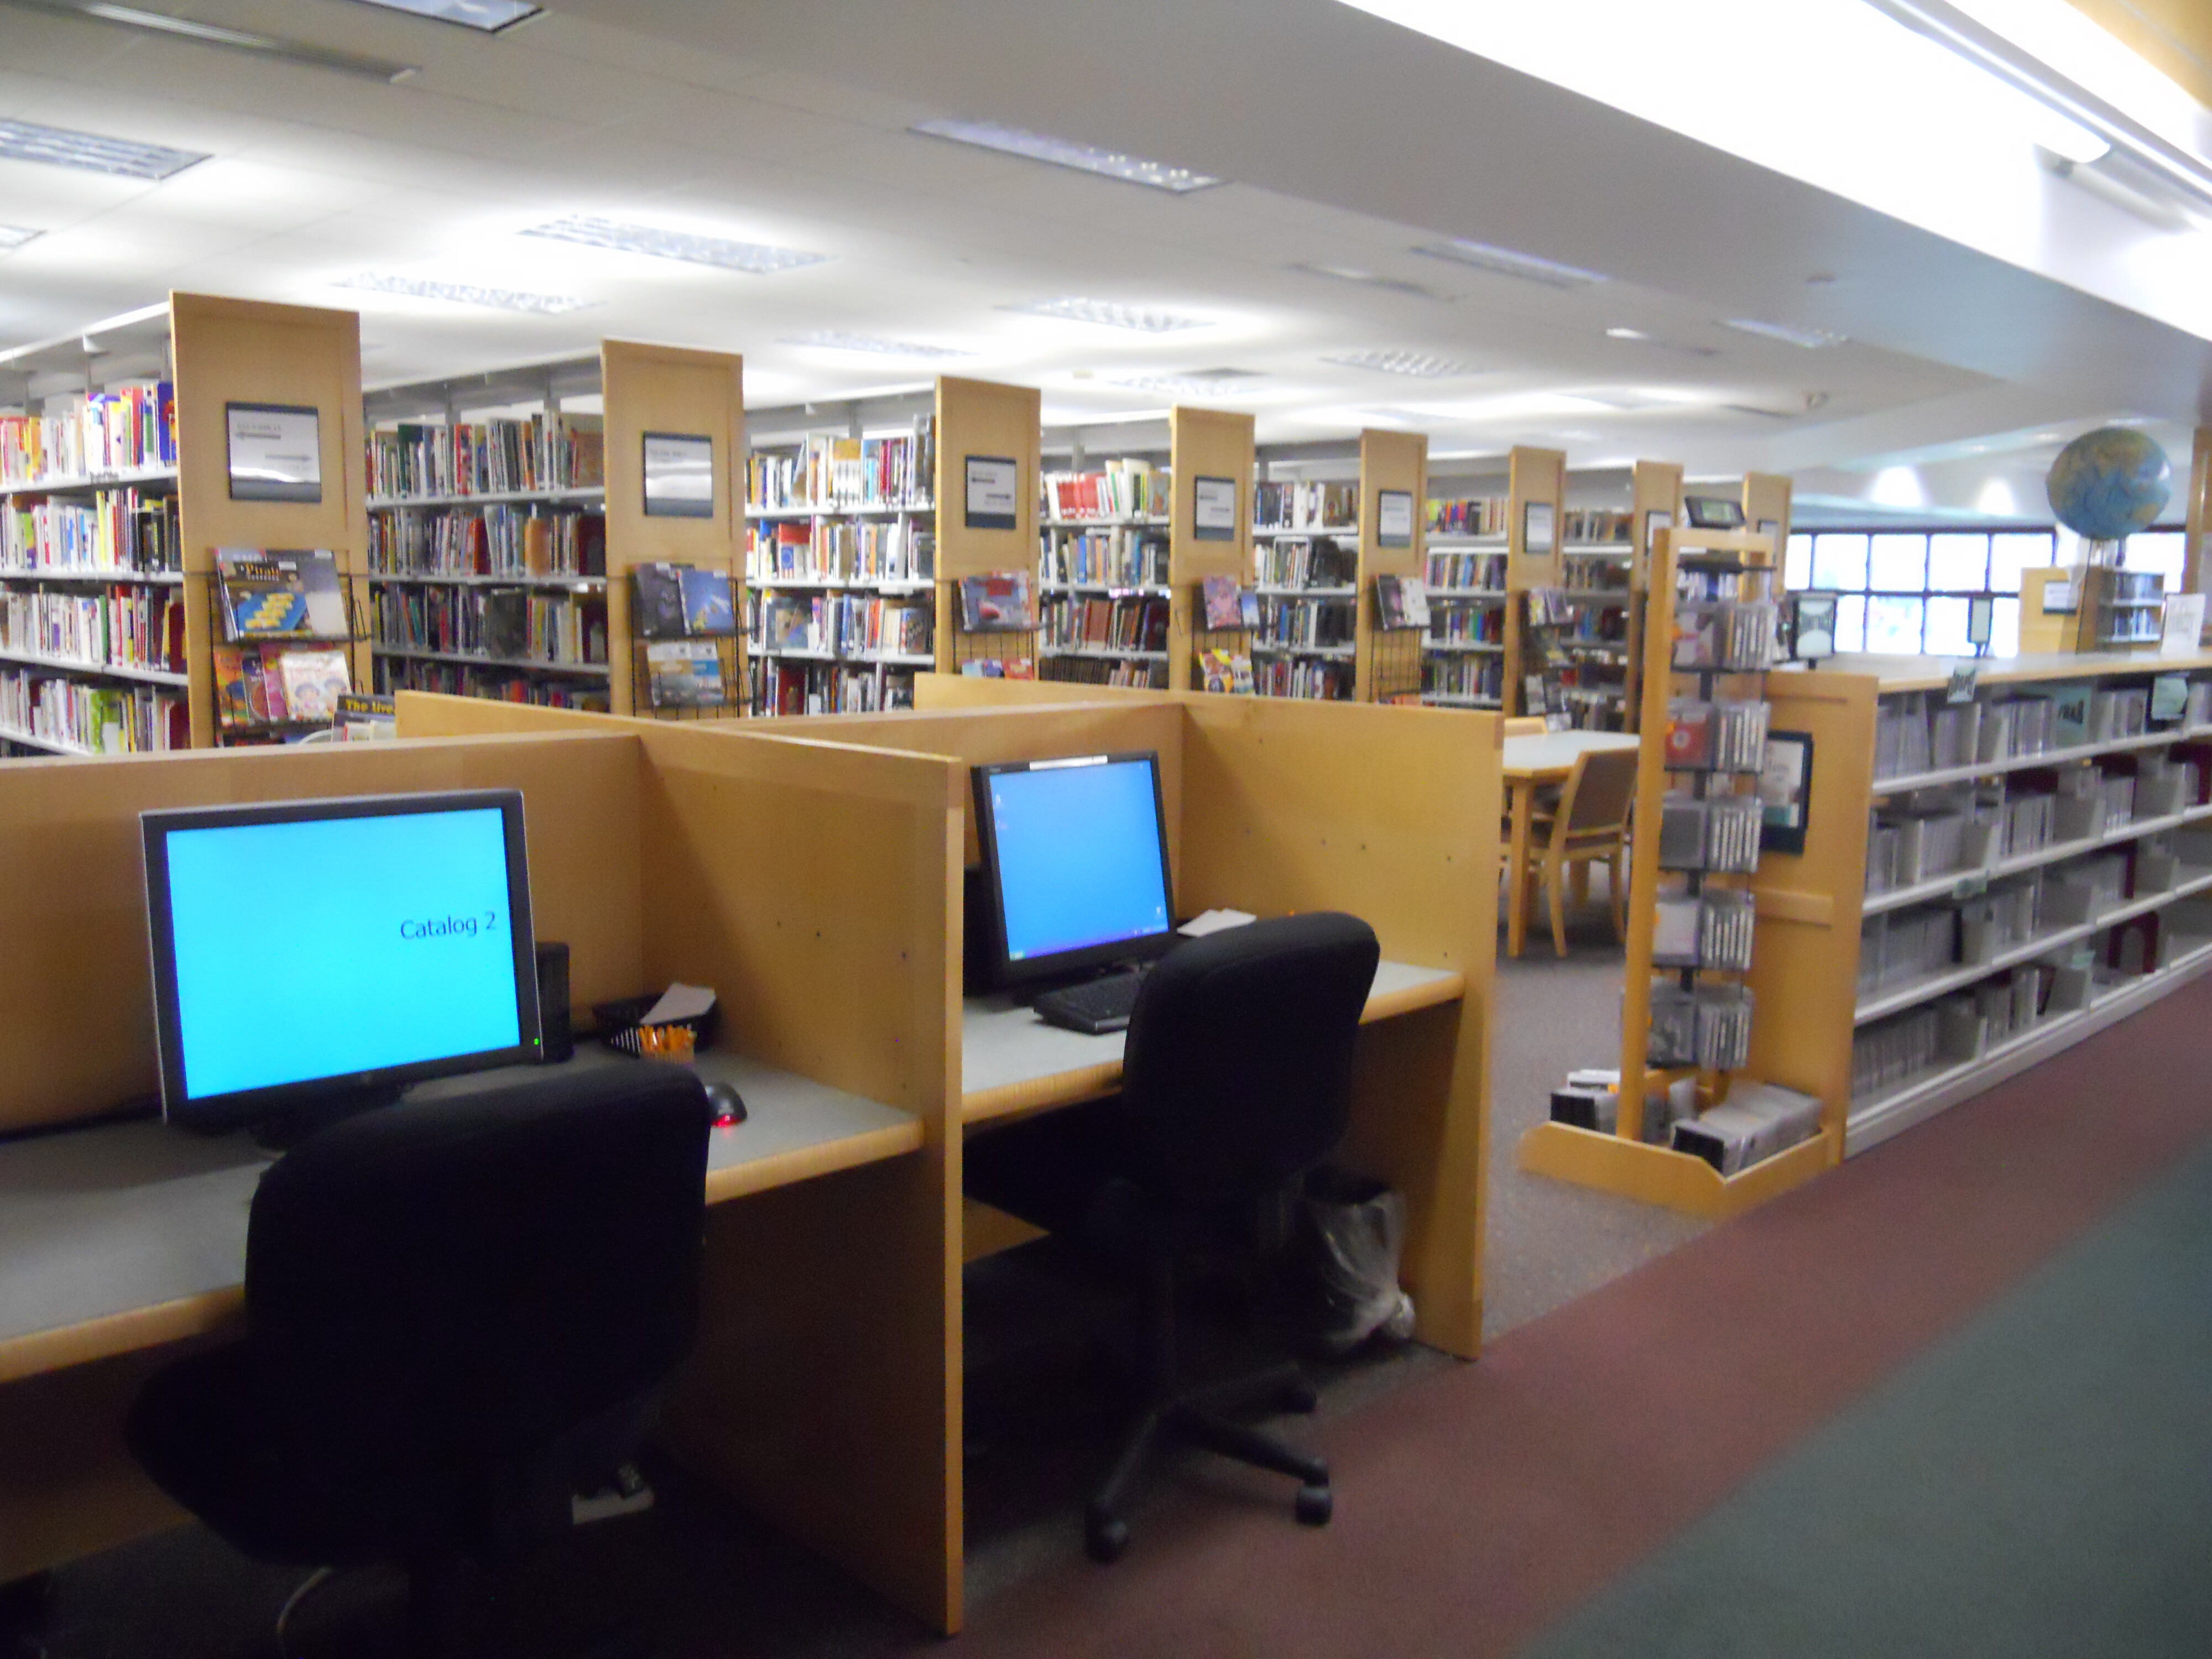 Computers with the library's catalog